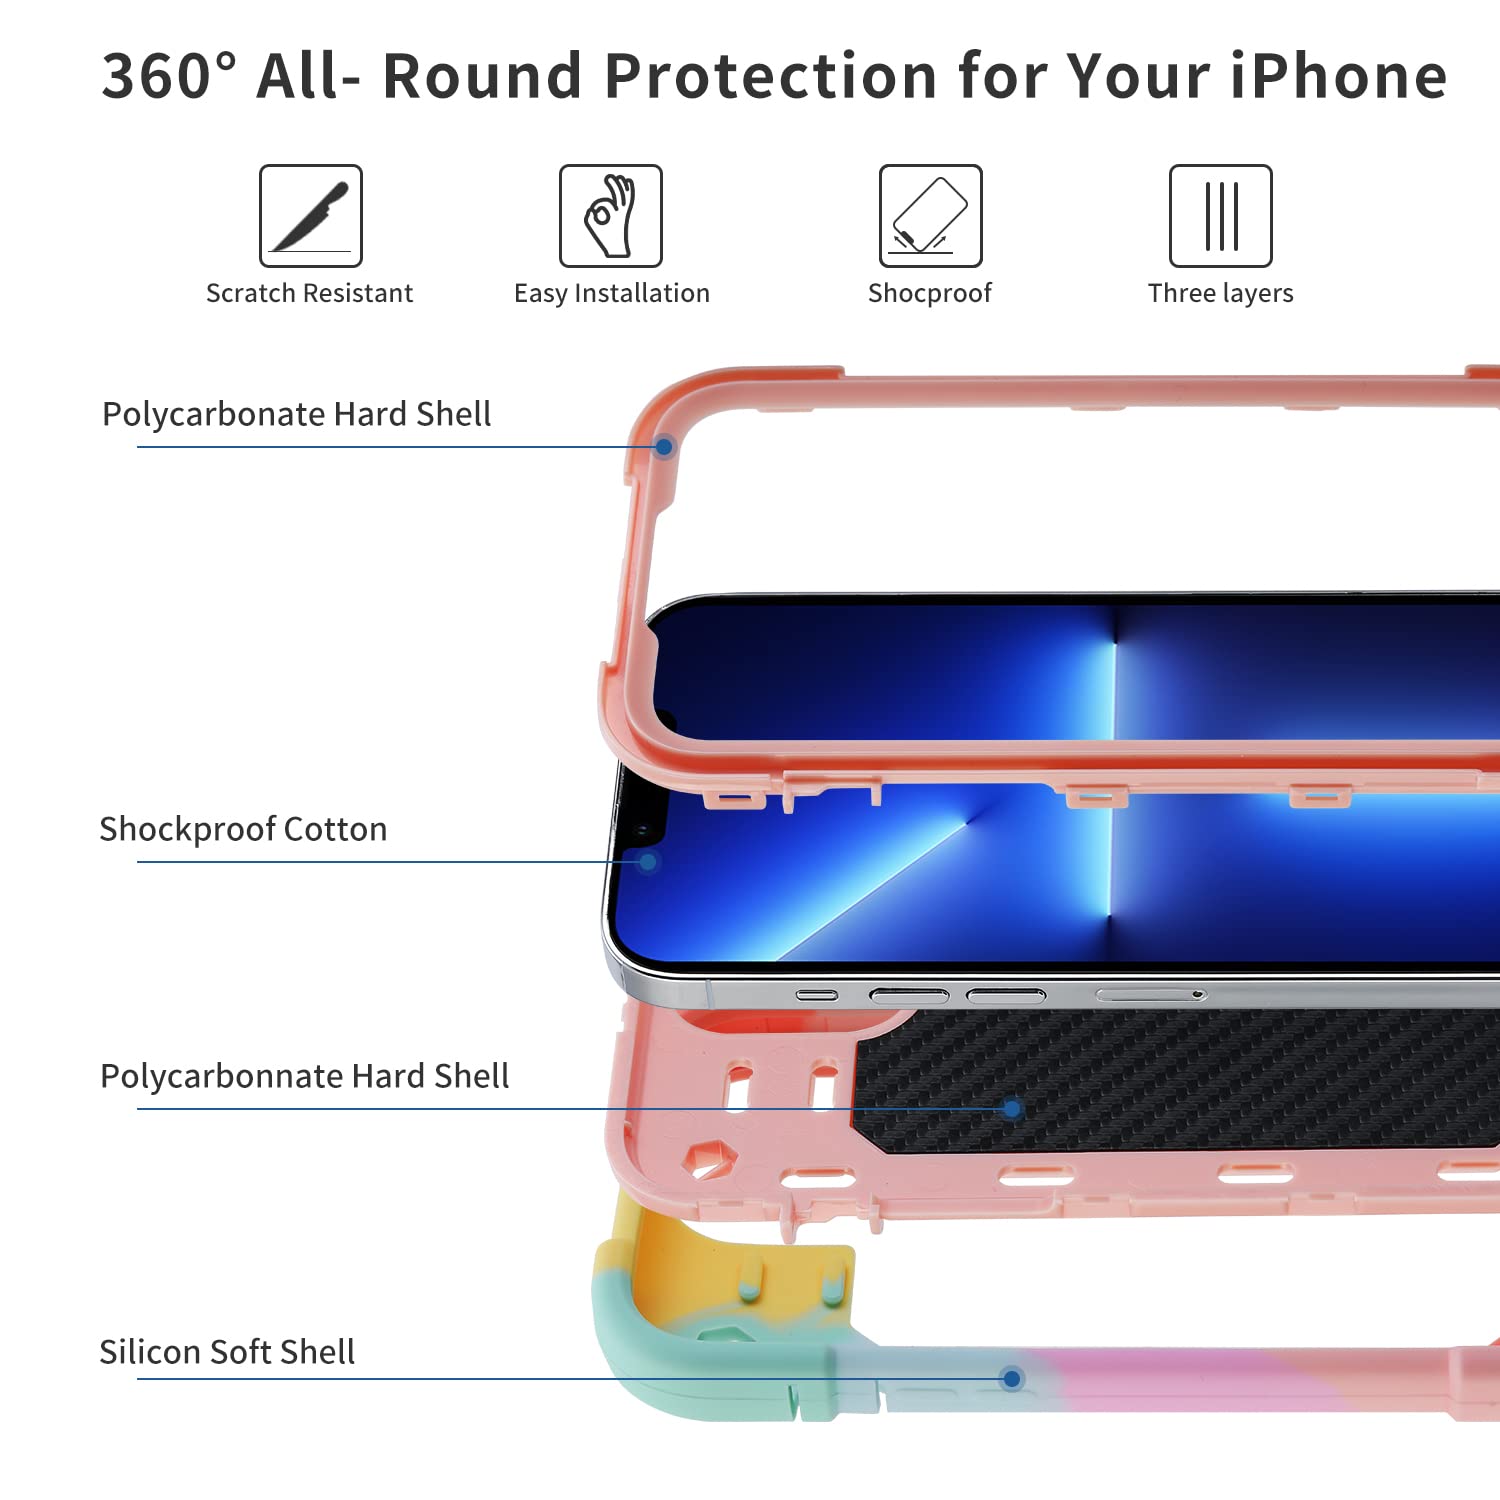 MARKILL Compatible with iPhone 13 Pro Max Case 6.7 Inch with Ring Stand, Heavy-Duty Military Grade Shockproof Phone Cover with Magnetic Car Mount for iPhone 13 Pro Max. (Rainbow Pink)